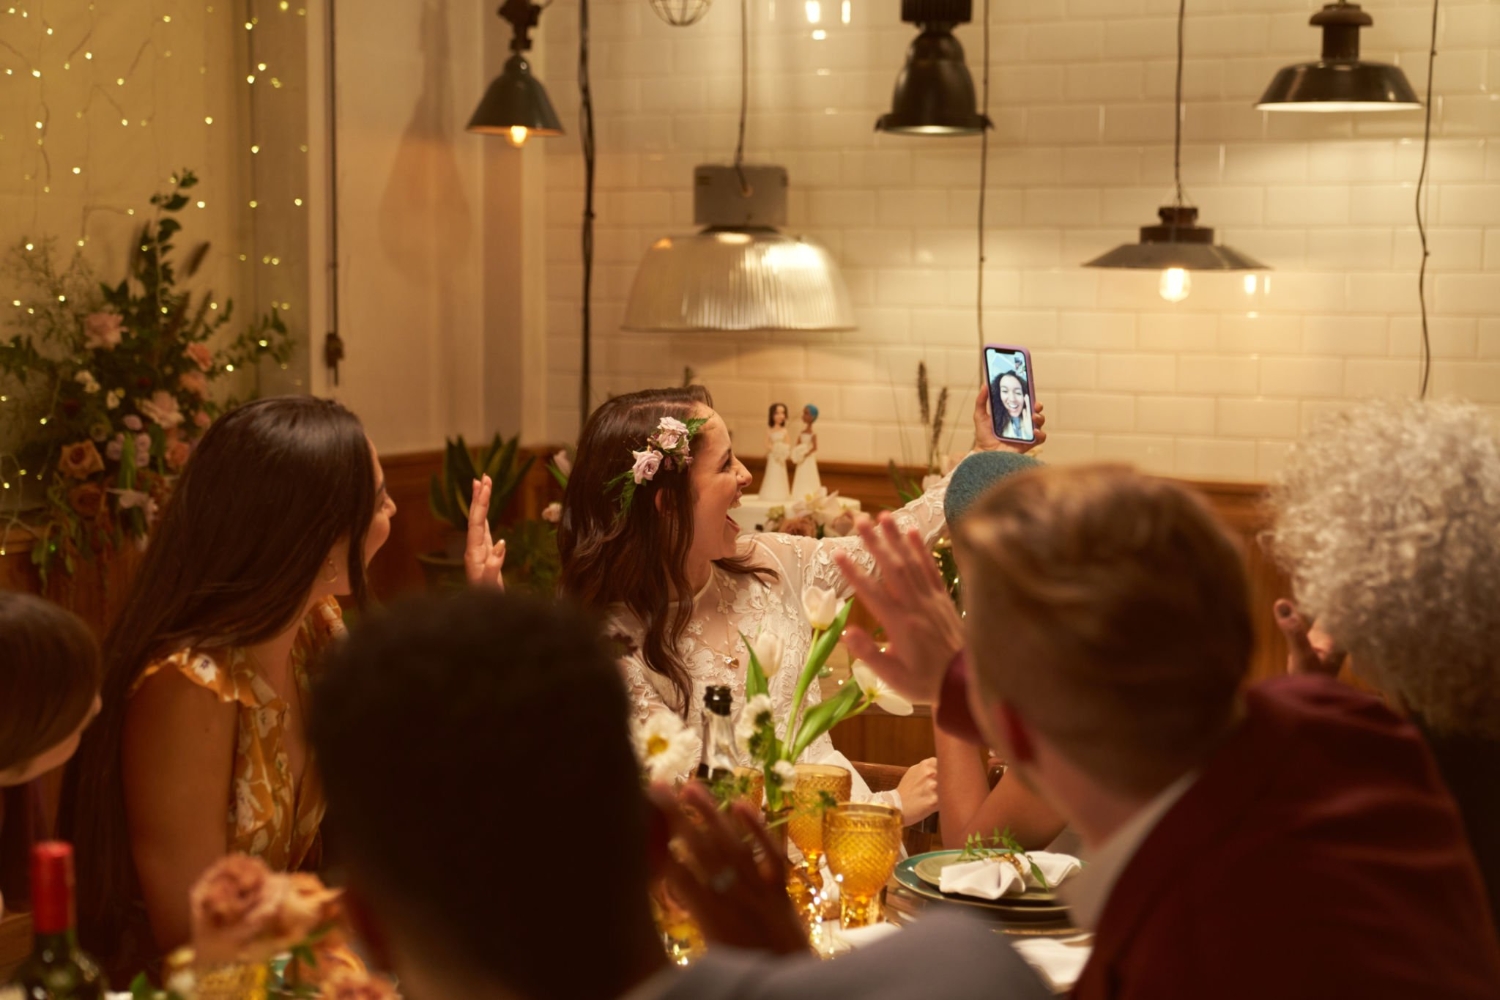 Lesbian wedding party with a friend on a video call